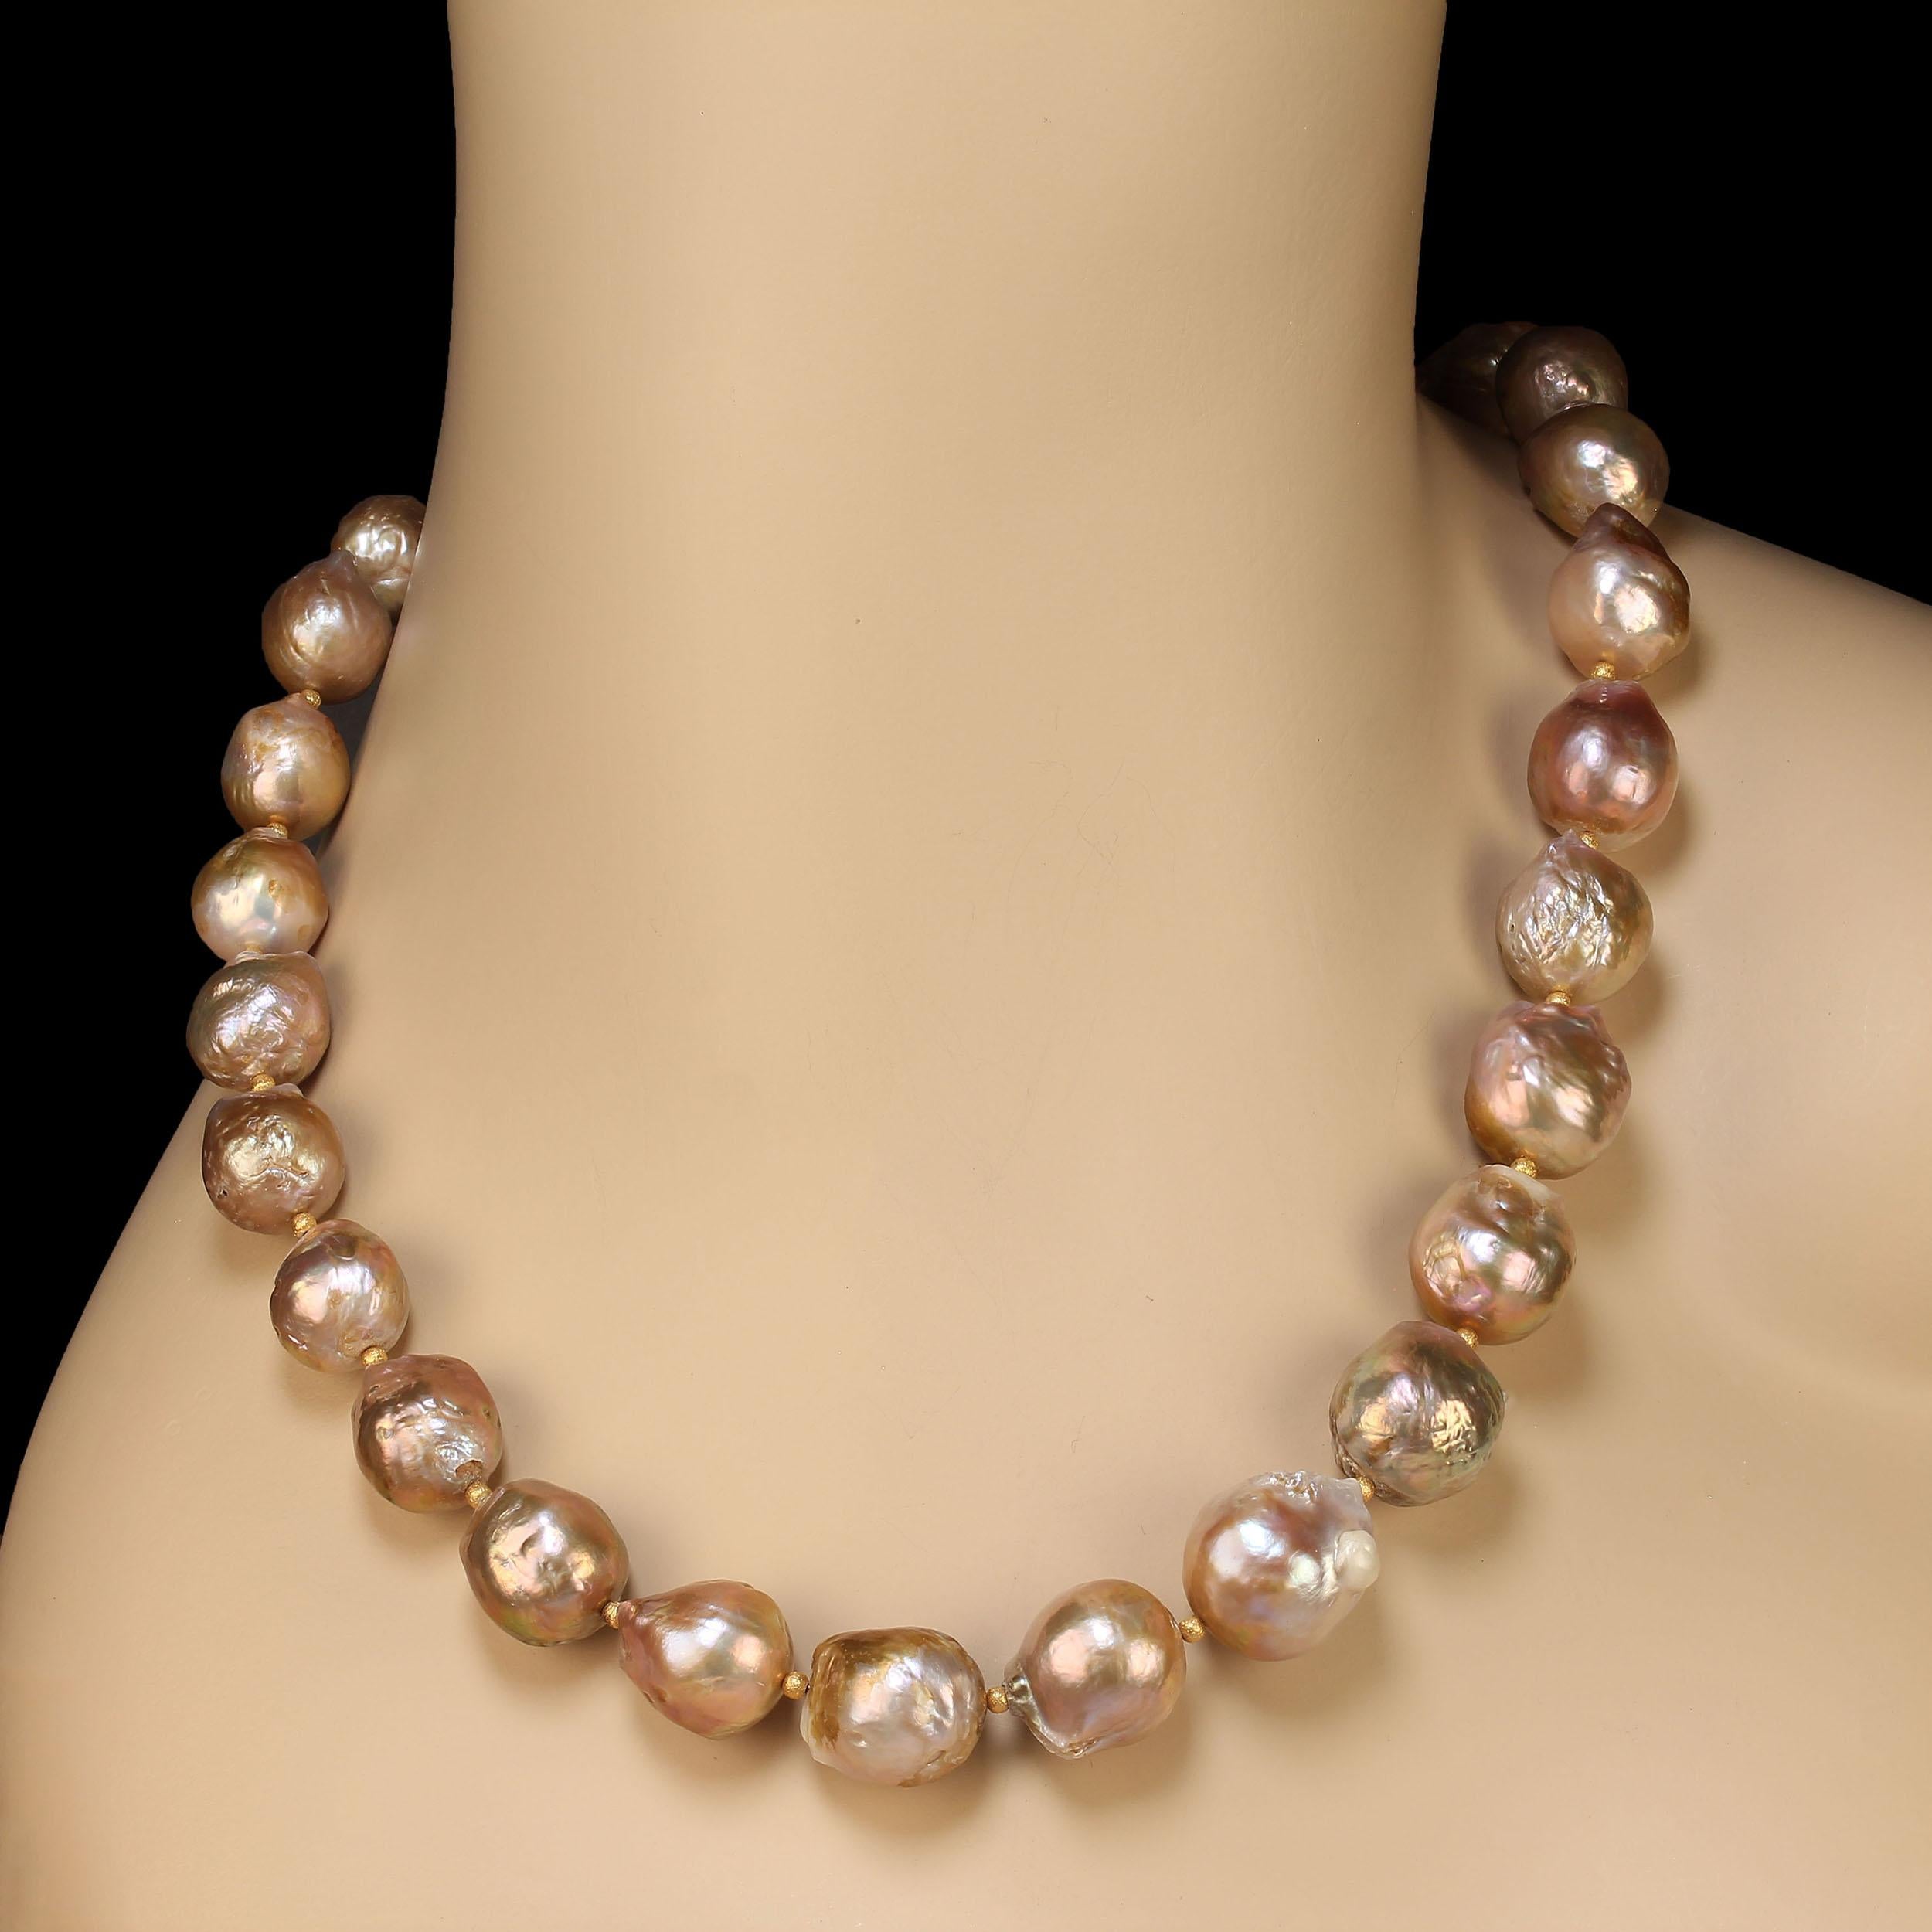 Bead AJD 21 Inch Elegant Gold Baroque Pearl necklace with goldy accents Great Gift! For Sale